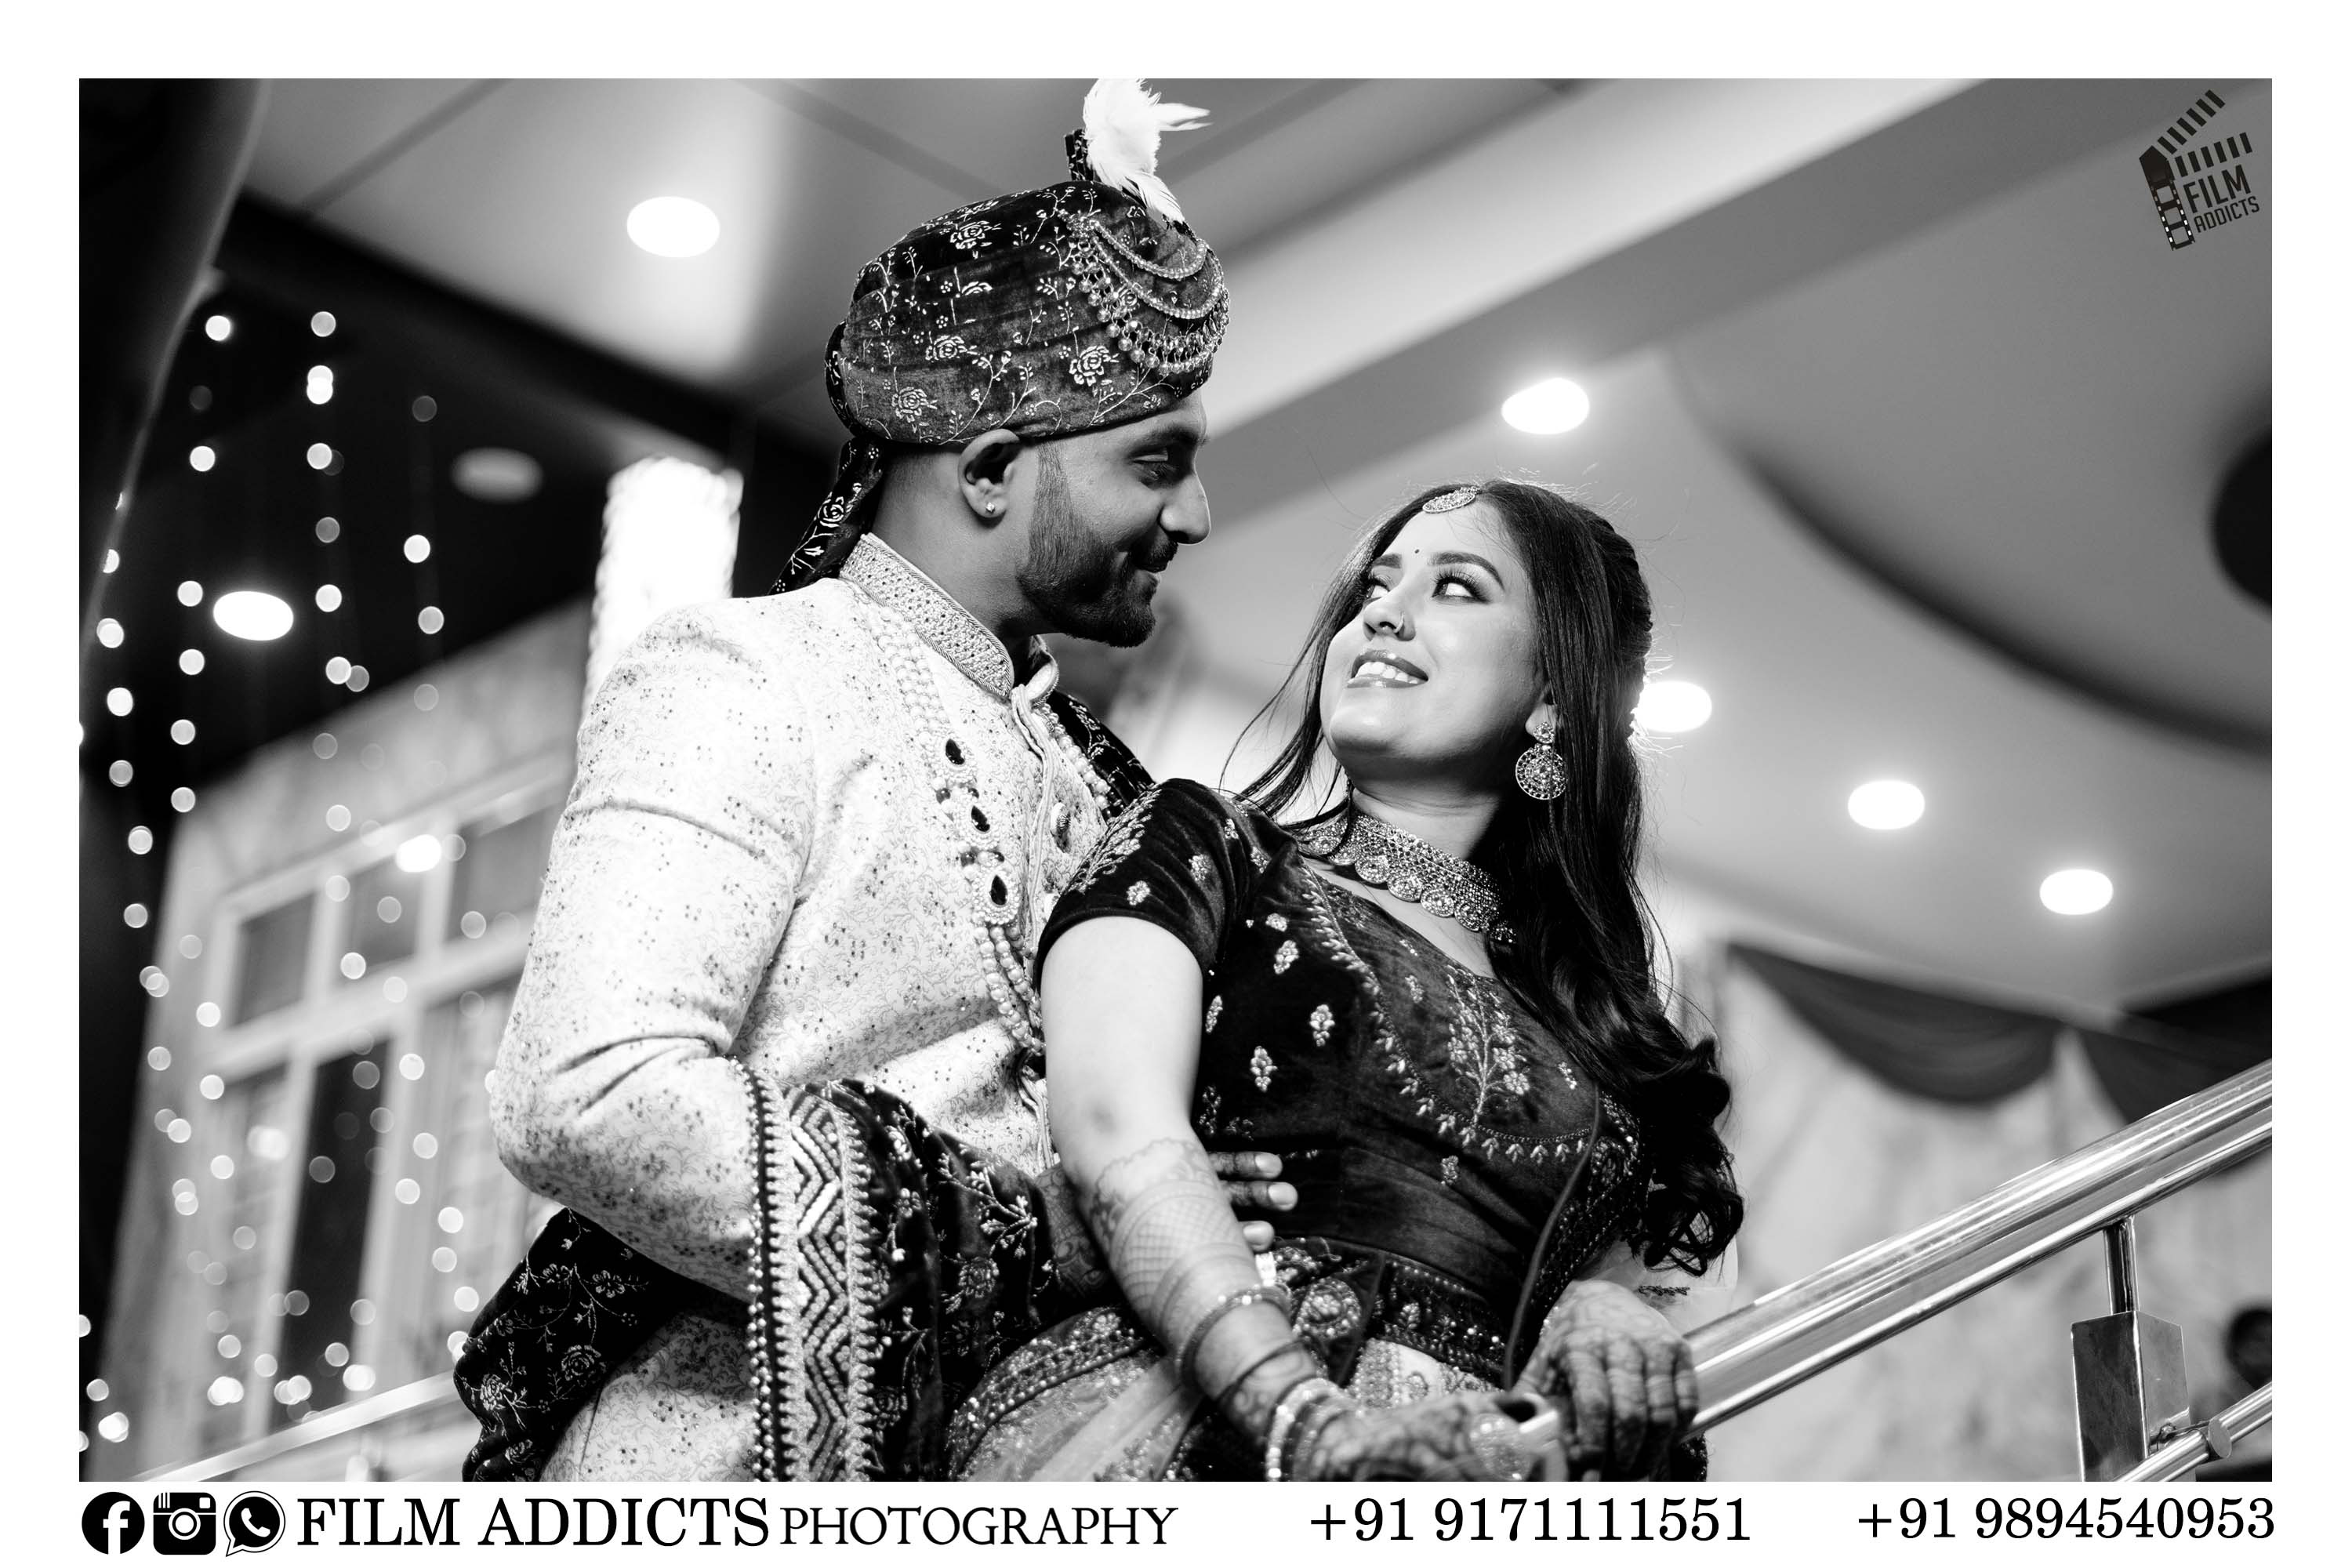 Best Wedding Planners in Salem-FilmAddicts Photography,best candid photographers in Madurai ,Best Wedding Candid photographers in Madurai, Wedding Candid Moments, FilmAddicts Photography ,FilmAddictsPhotography ,best wedding in Madurai, Best Candid shoot in Madurai, Best moment ,Best wedding moments, Best wedding photography in Madurai, Best wedding videography in Madurai, Bestcoupleshoot, Best candid, Best wedding shoot, Best wedding candid, best marriage photographers in Madurai, best marriage photography in Madurai, best candid photography, best Madurai photography, Madurai ,Madurai photography ,Madurai couples ,candid shoot ,candid ,tamilnadu wedding photography, best photographers in Madurai, Best Wedding Photographers in Madurai,  Wedding Candid Moments FilmAddicts Photography, FilmAddicts Photographers,  Best Candid shooting Madurai, bestmoment , Best Wedding moments , Best wedding photography in Madurai, Best wedding videography in Madurai, Best couple shoot, Best candid, Best wedding shoot ,Best wedding candid, best marriage photographers in Madurai, best marriage photography in Madurai, best candid photography, best Madurai photography ,Madurai photography , Madurai couples, candid shoot, candid, tamilnadu wedding photography, best photographers in Madurai, Tamilnadu